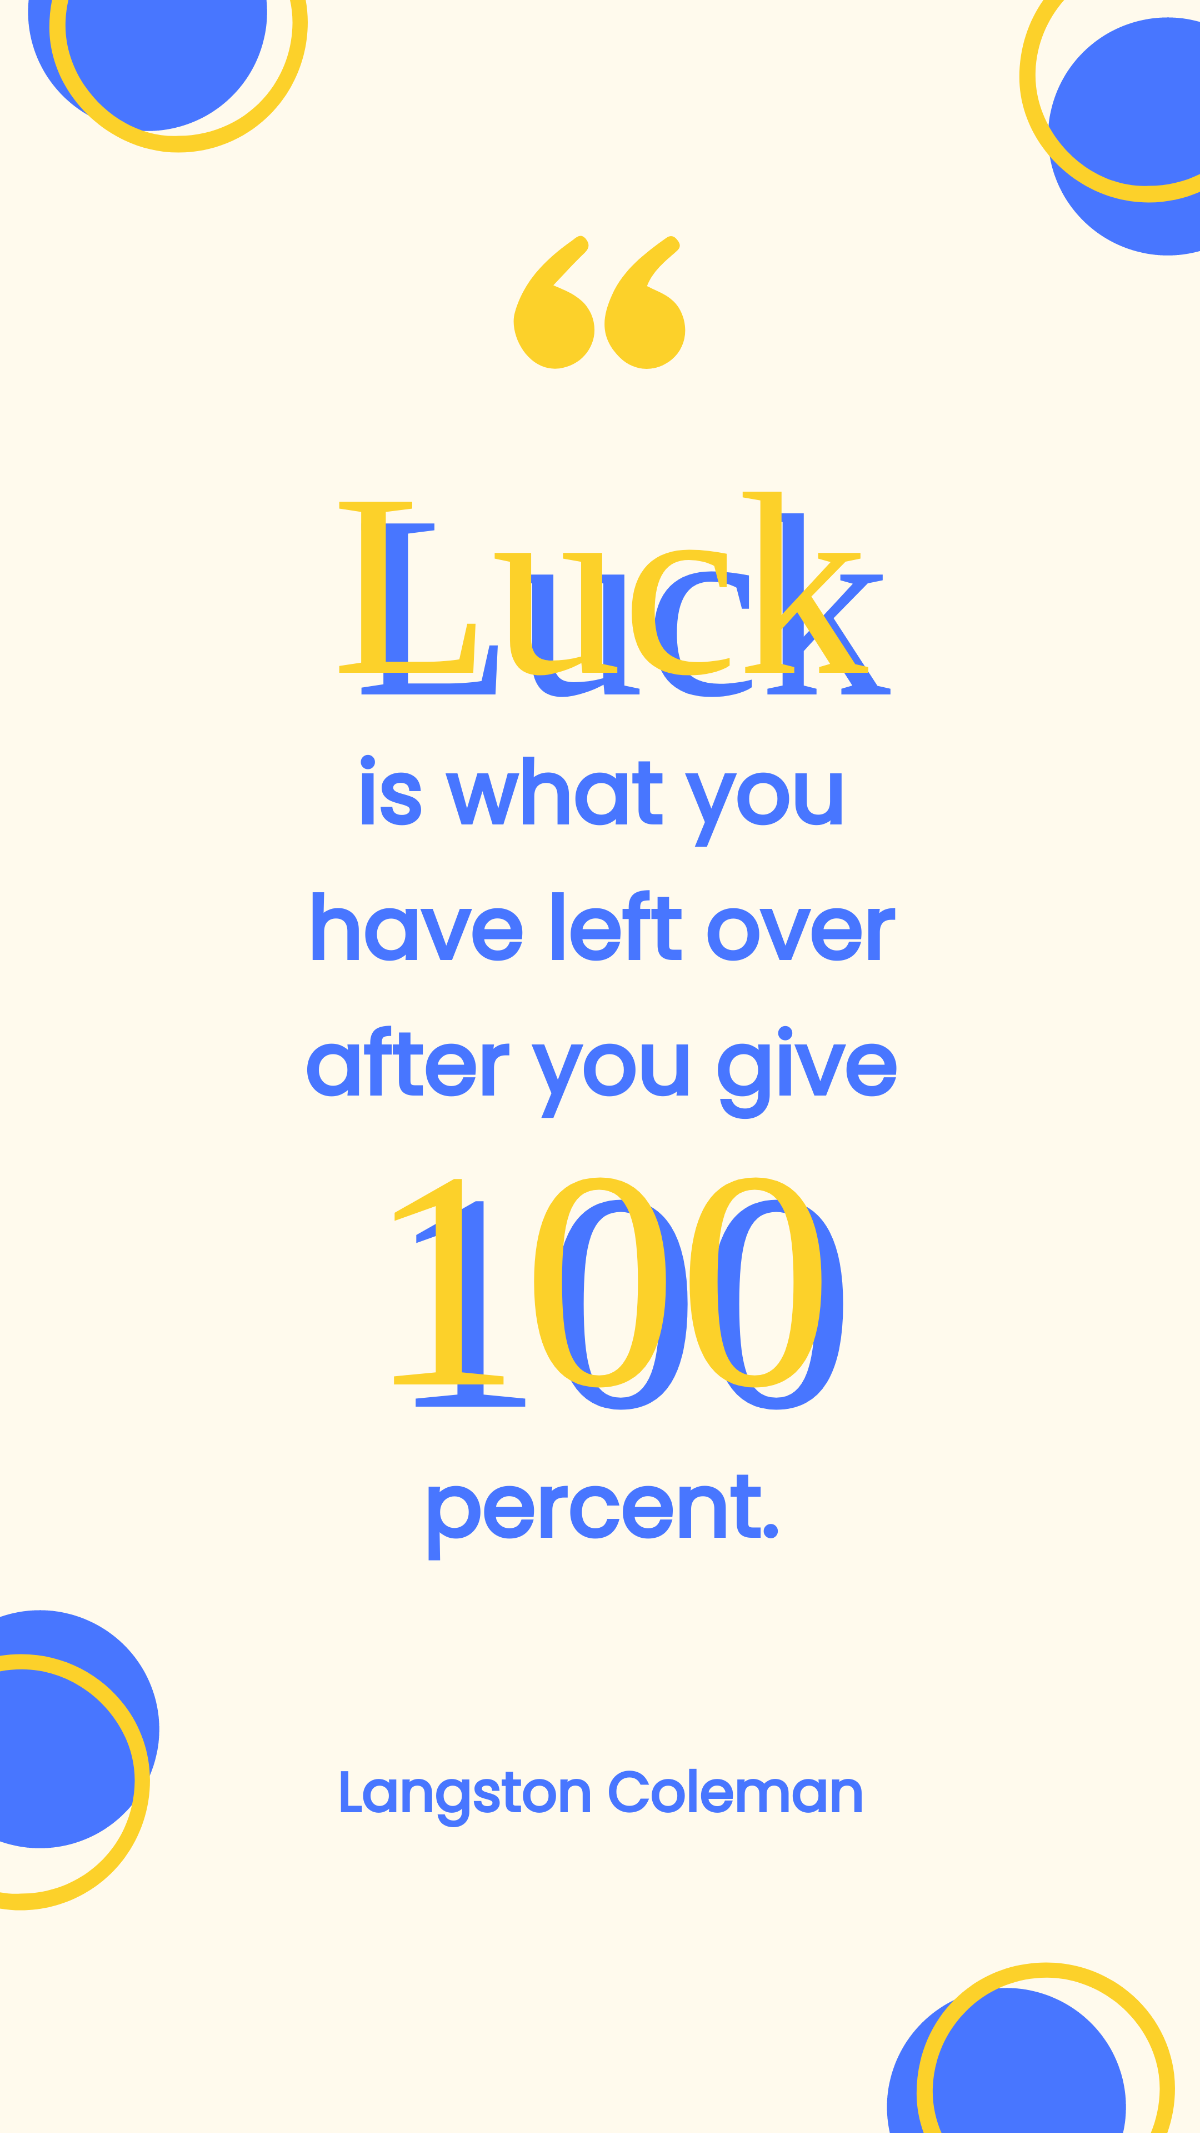 Langston Coleman - Luck is what you have left over after you give 100 percent. Template